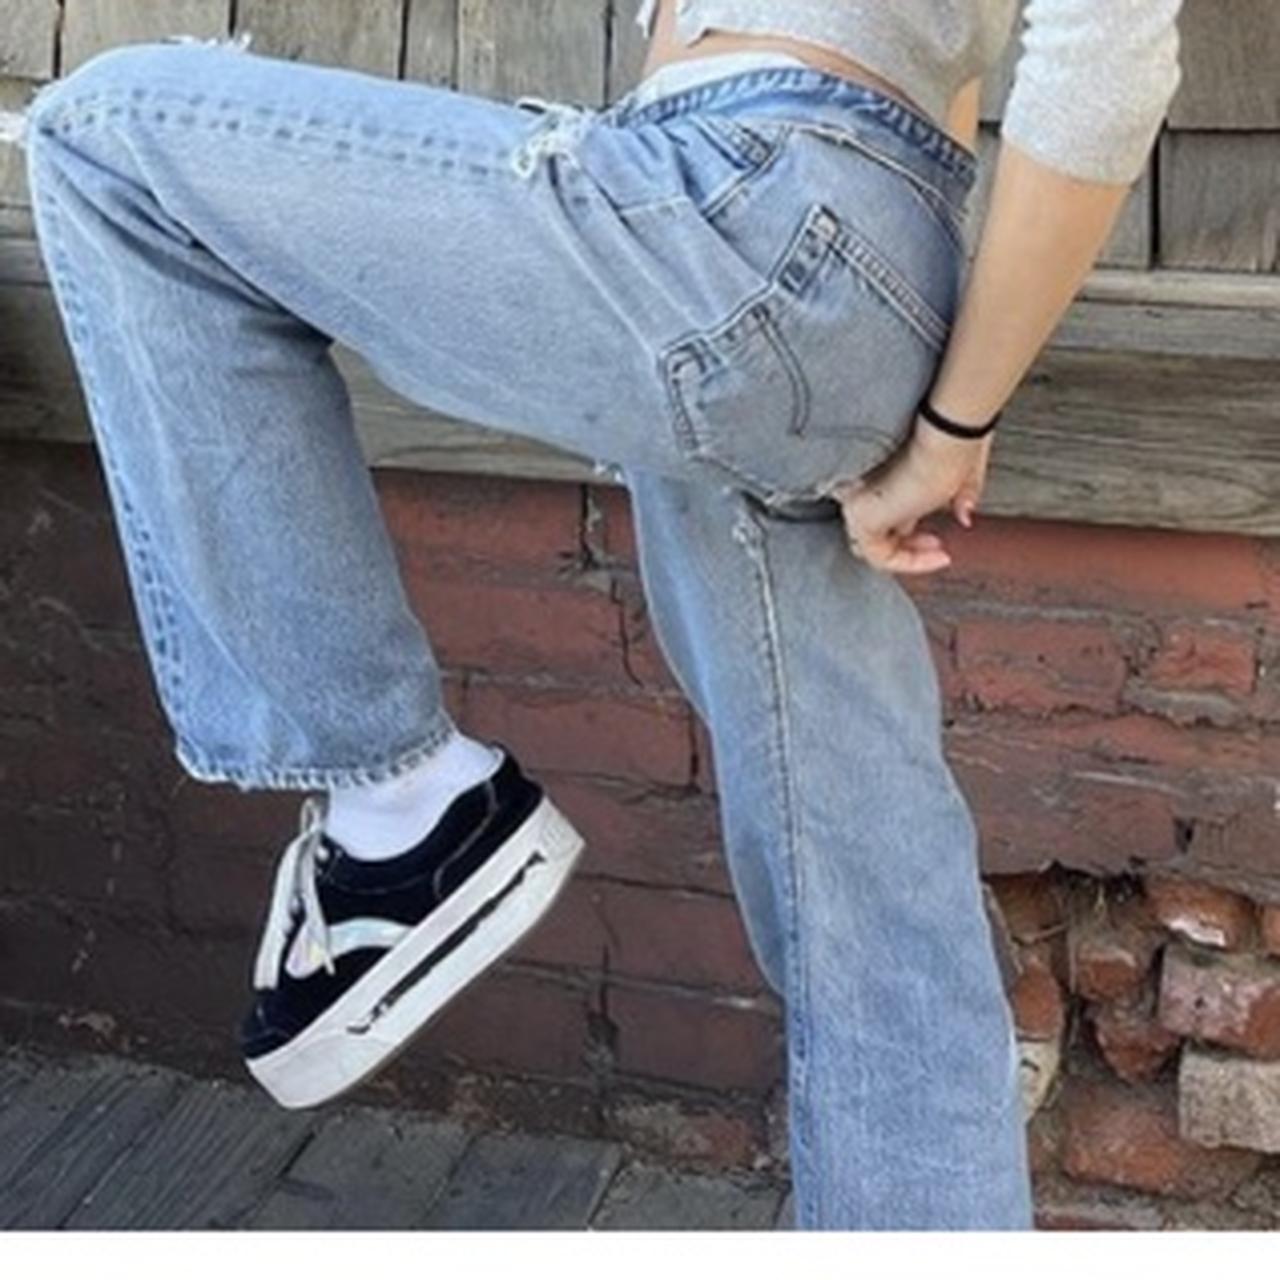 ISO DONT BUY. Does anyone know what shoes these are ? - Depop